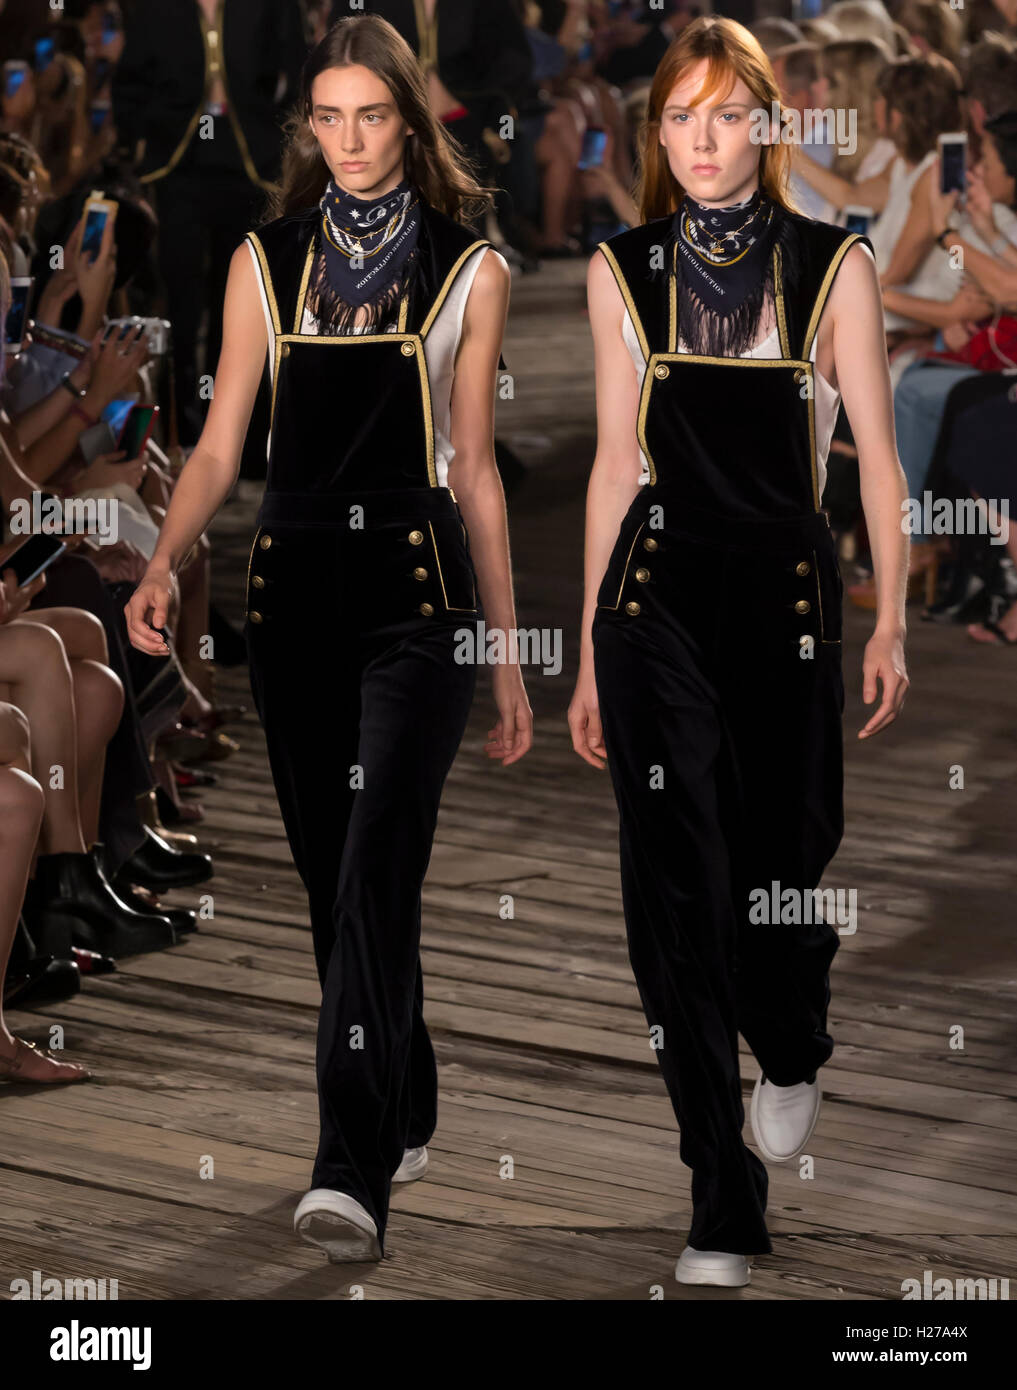 NEW YORK, NY - SEPTEMBER 09, 2016: Amanda Googe and Kiki Willems walk the  runway at Tommy Hilfiger Women's Fashion Show Stock Photo - Alamy